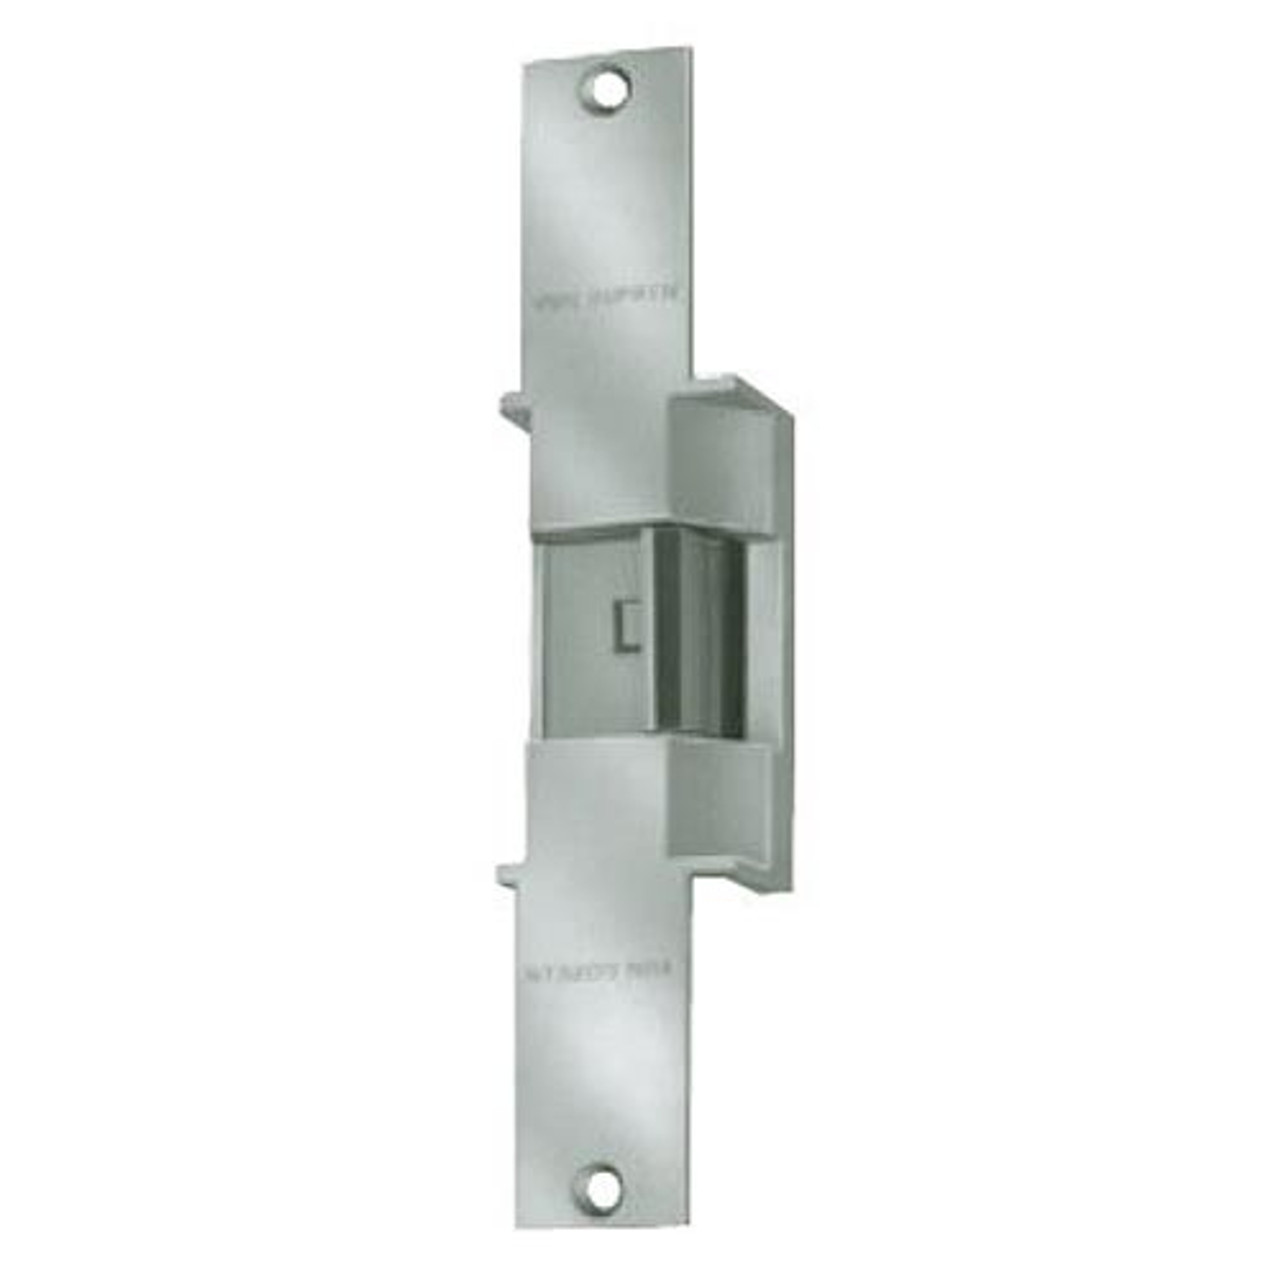 6214-DS-12VDC-US32 Von Duprin Electric Strike in Bright Stainless Steel Finish